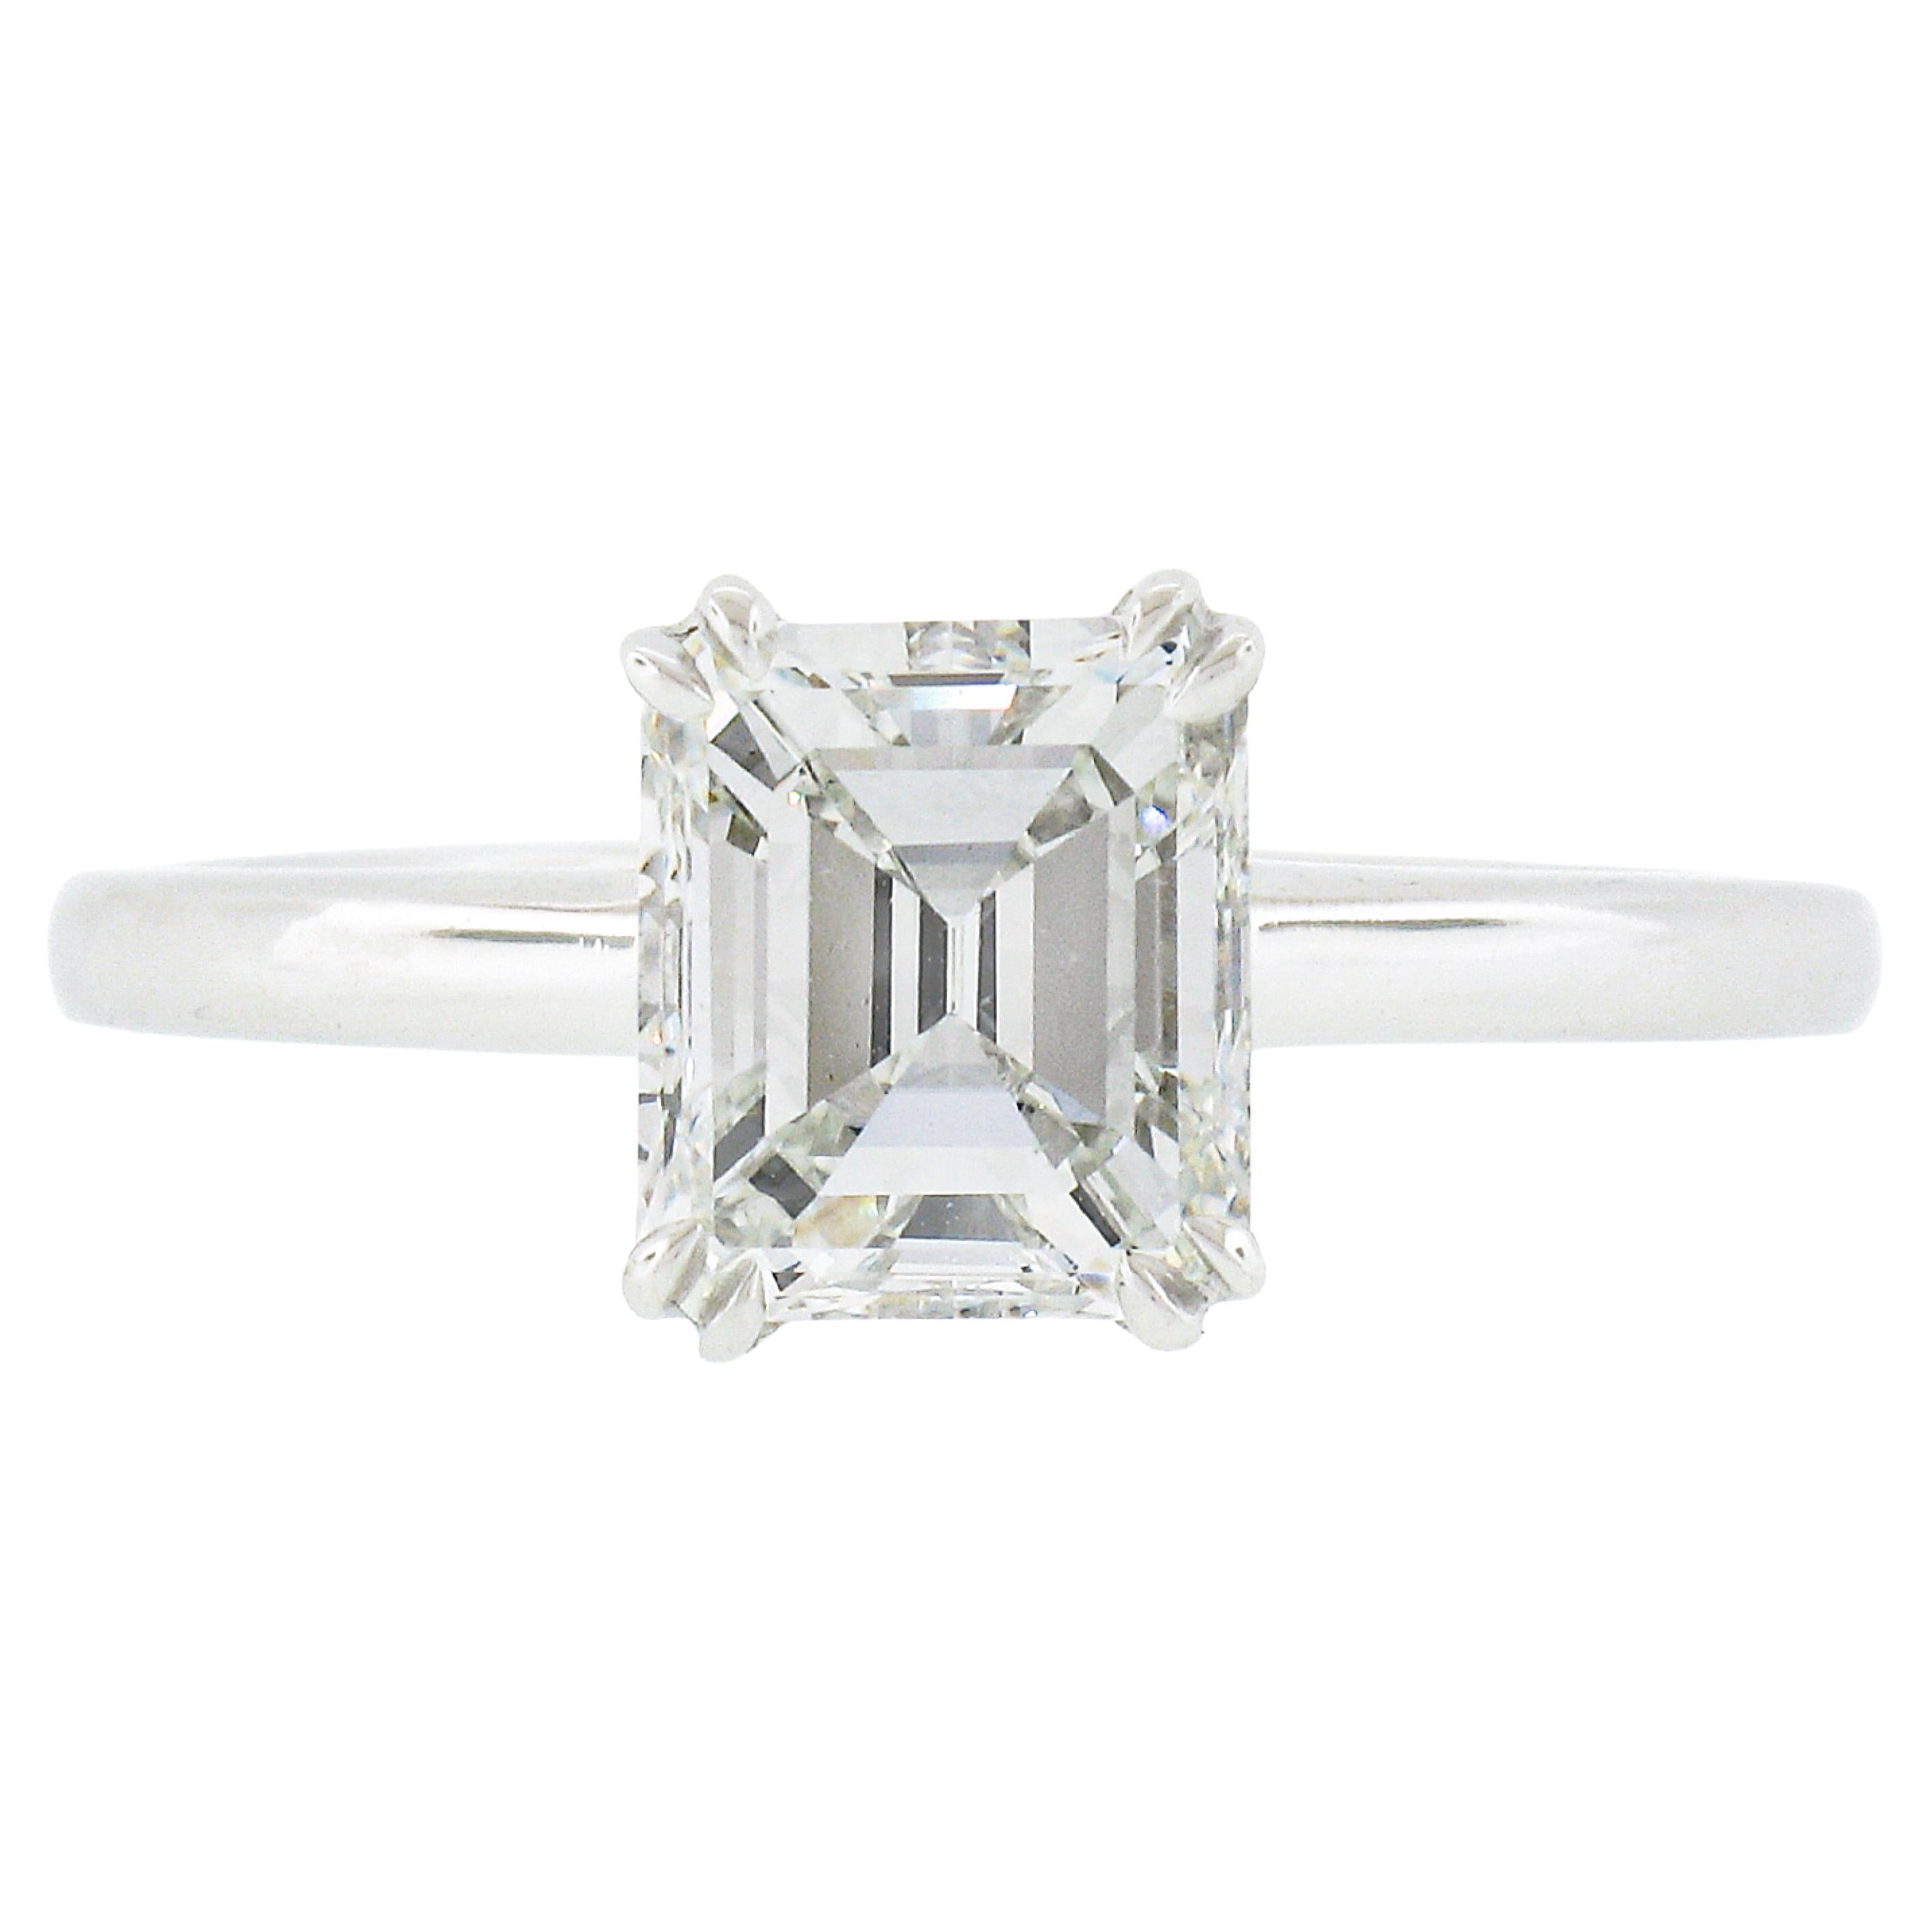 New Platinum 1.88ctw GIA Old Emerald Cut Prong Diamond Solitaire Engagement Ring